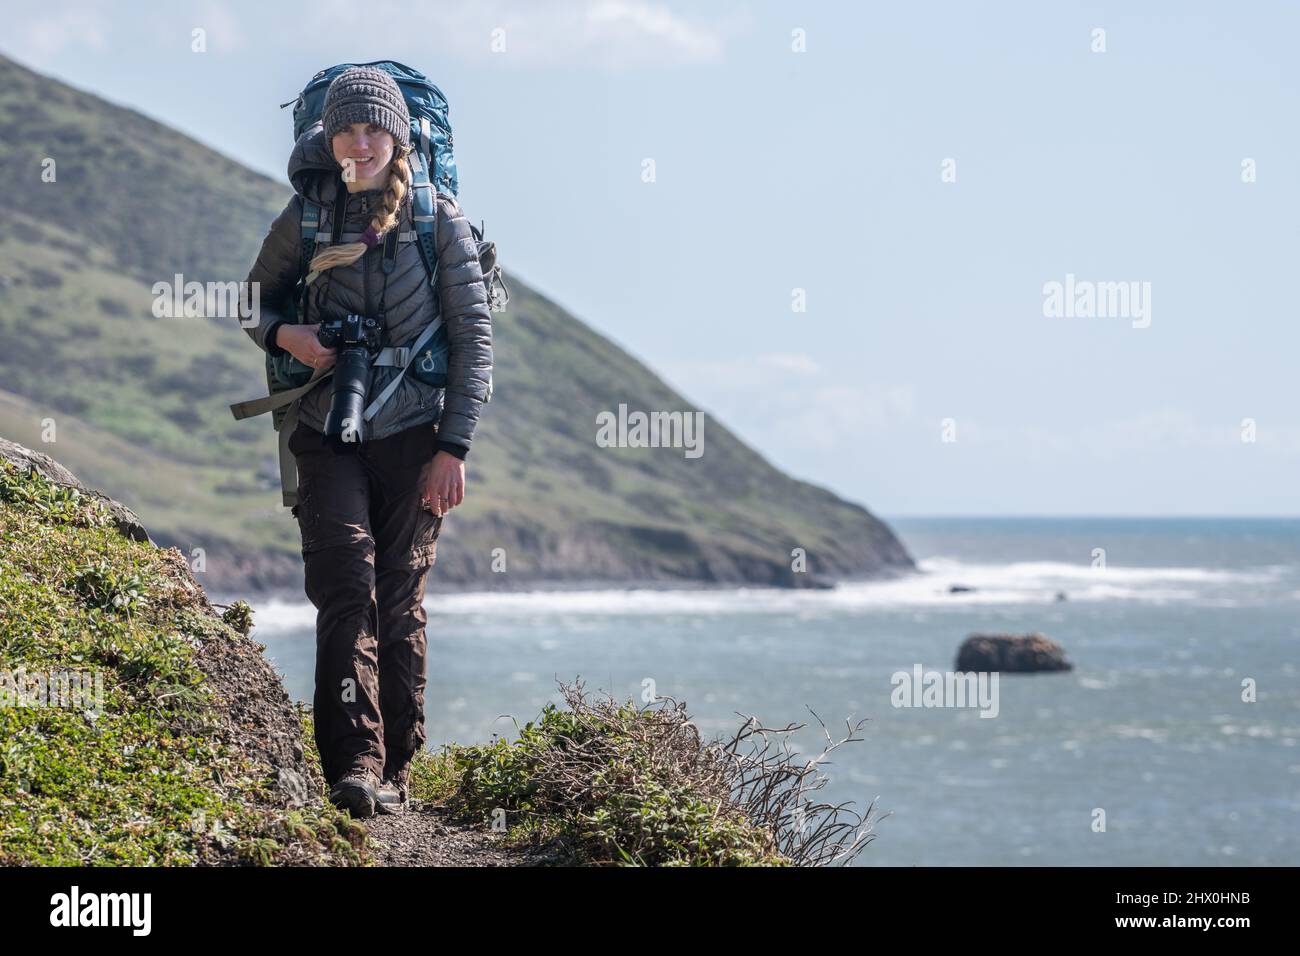 A blonde female backpacker walking with her camera and backpack along the lost coast trail in Humboldt county, Northern California. Stock Photo